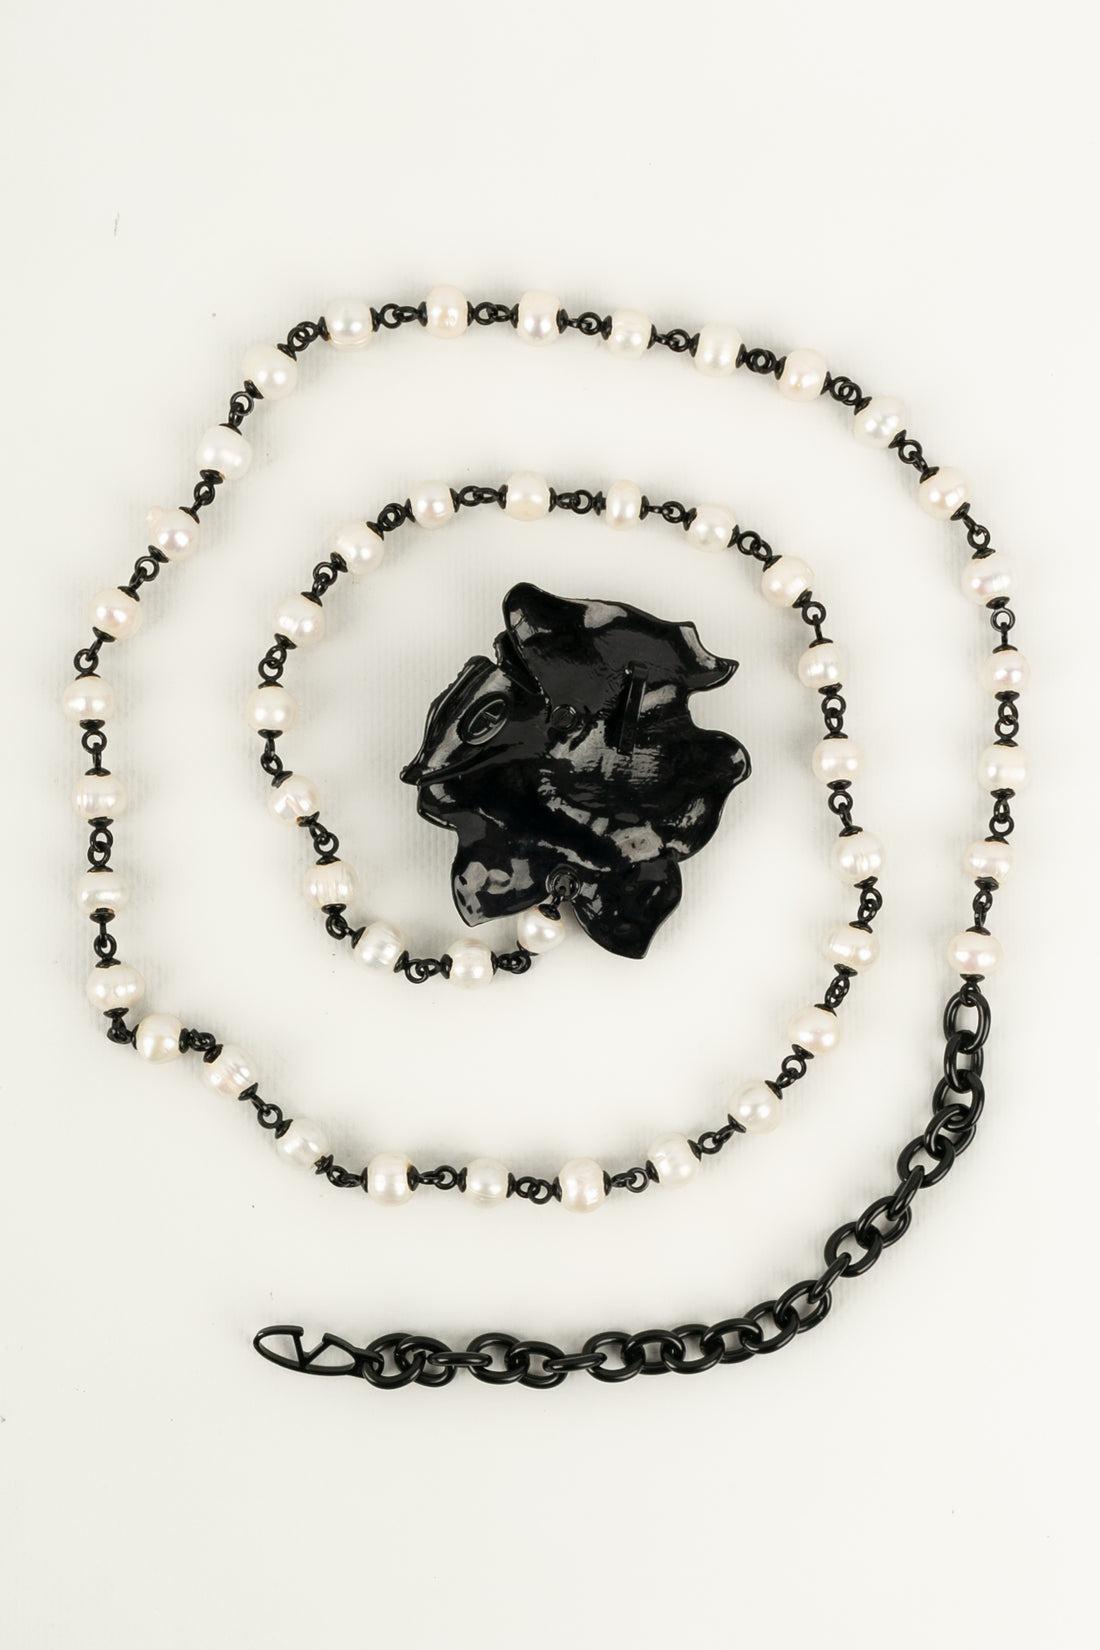 Valentino - Necklace in black enameled metal, costume pearly beads, and black rhinestones.

Additional information:
Condition: Very good condition
Dimensions: Length: from 95 cm to 111 cm

Seller Reference: ACC191